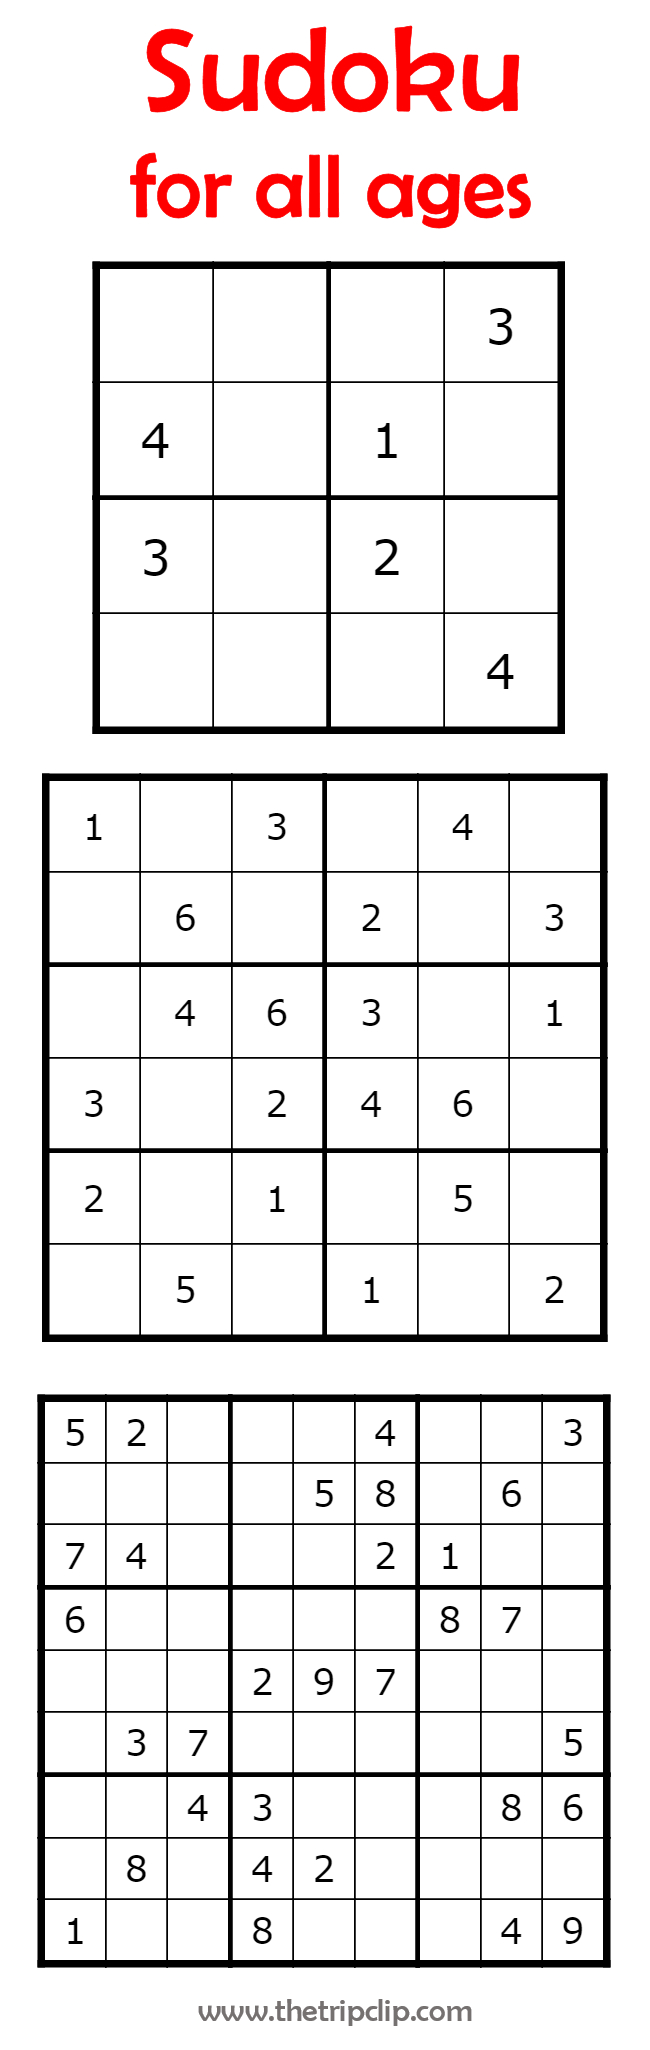 Sudoku For All Ages Plus Lots Of Other Printable Activities For Kids - Printable Puzzles 4X4